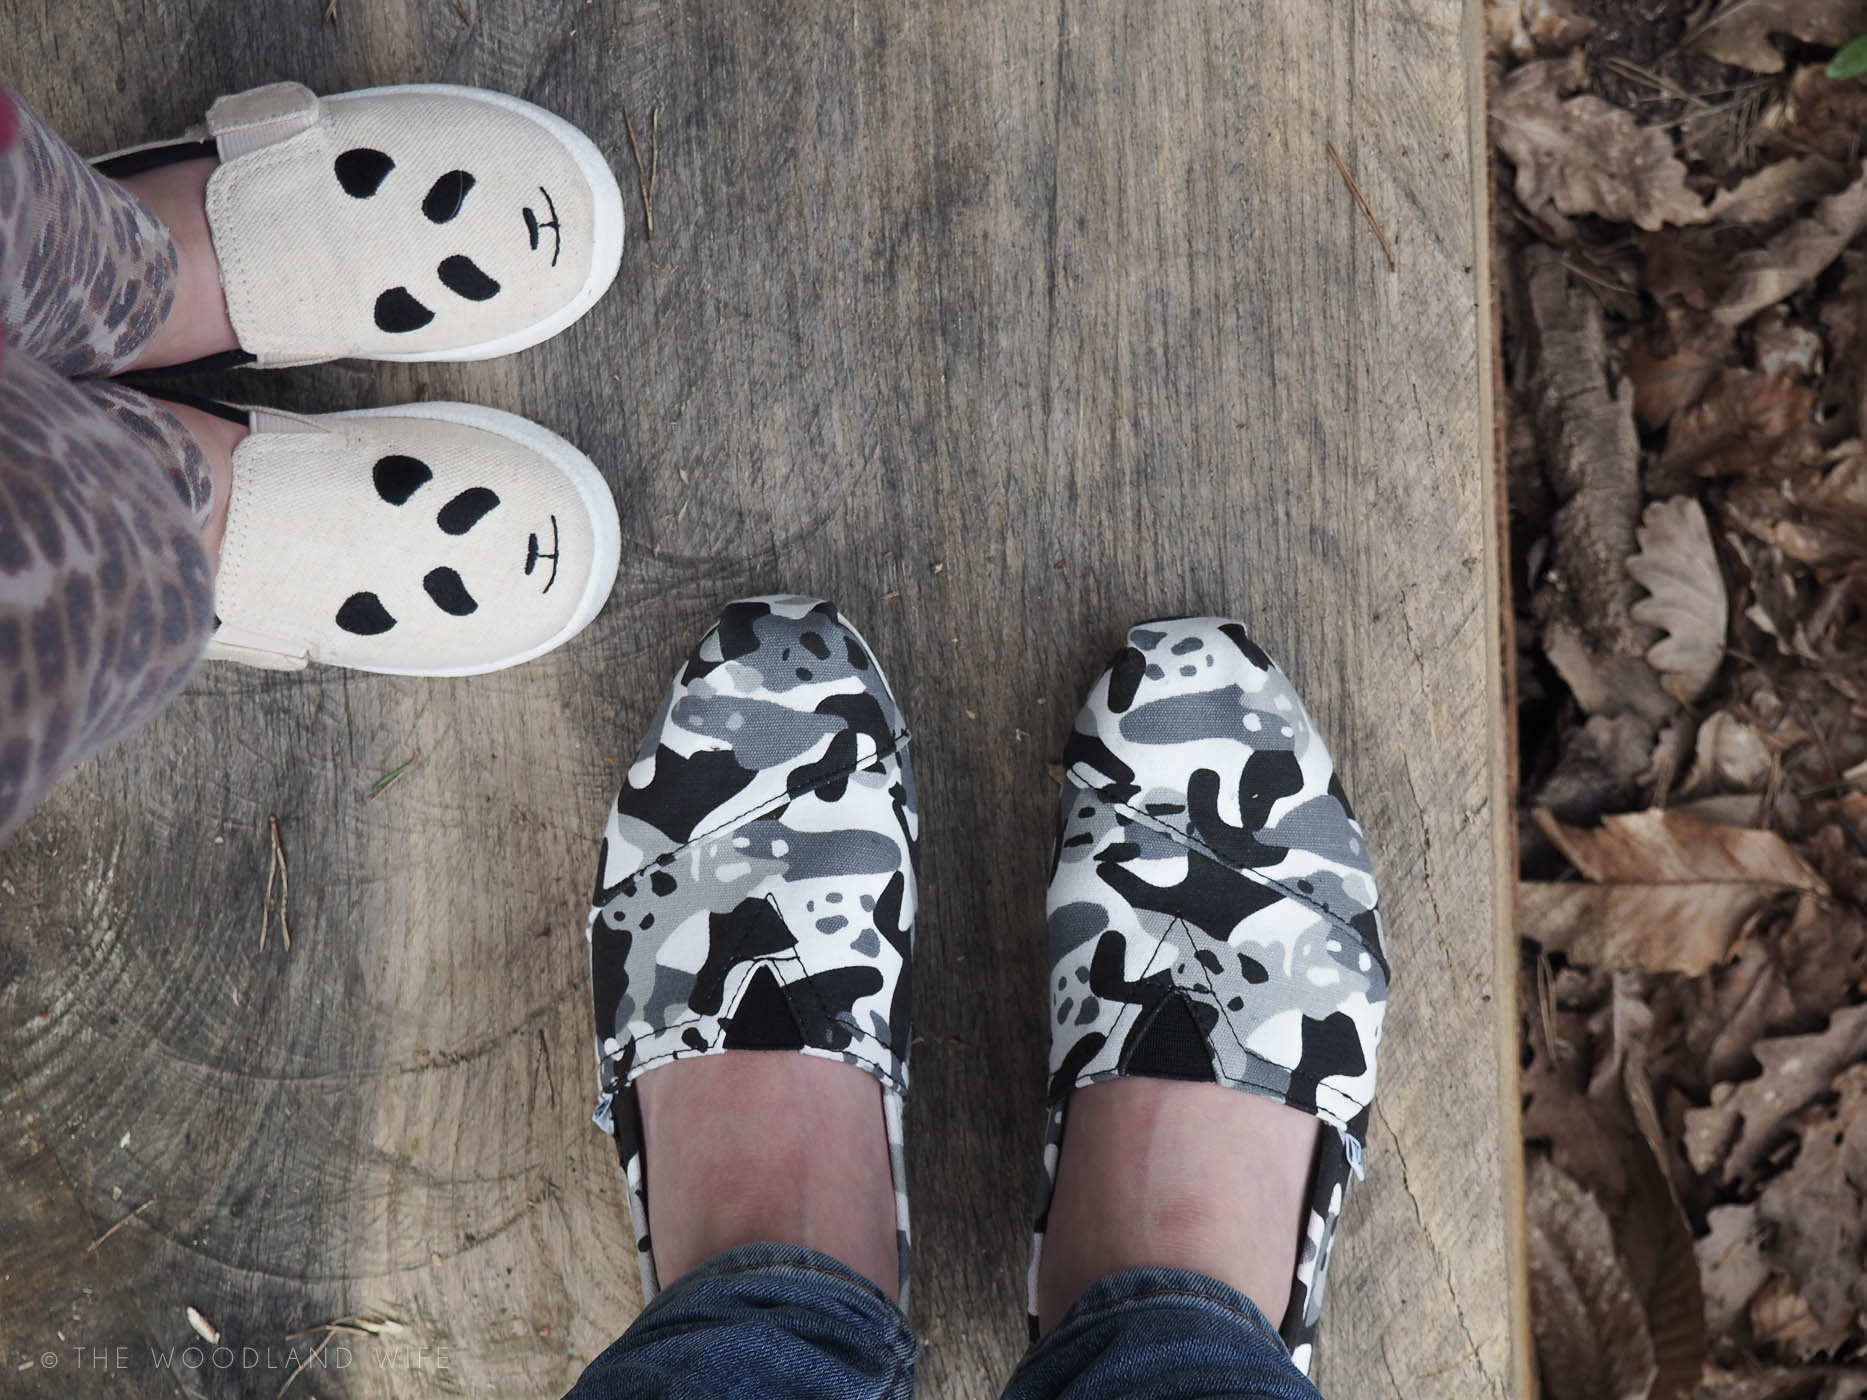 The Woodland Wife - TOMS Panda Collection with WildAid